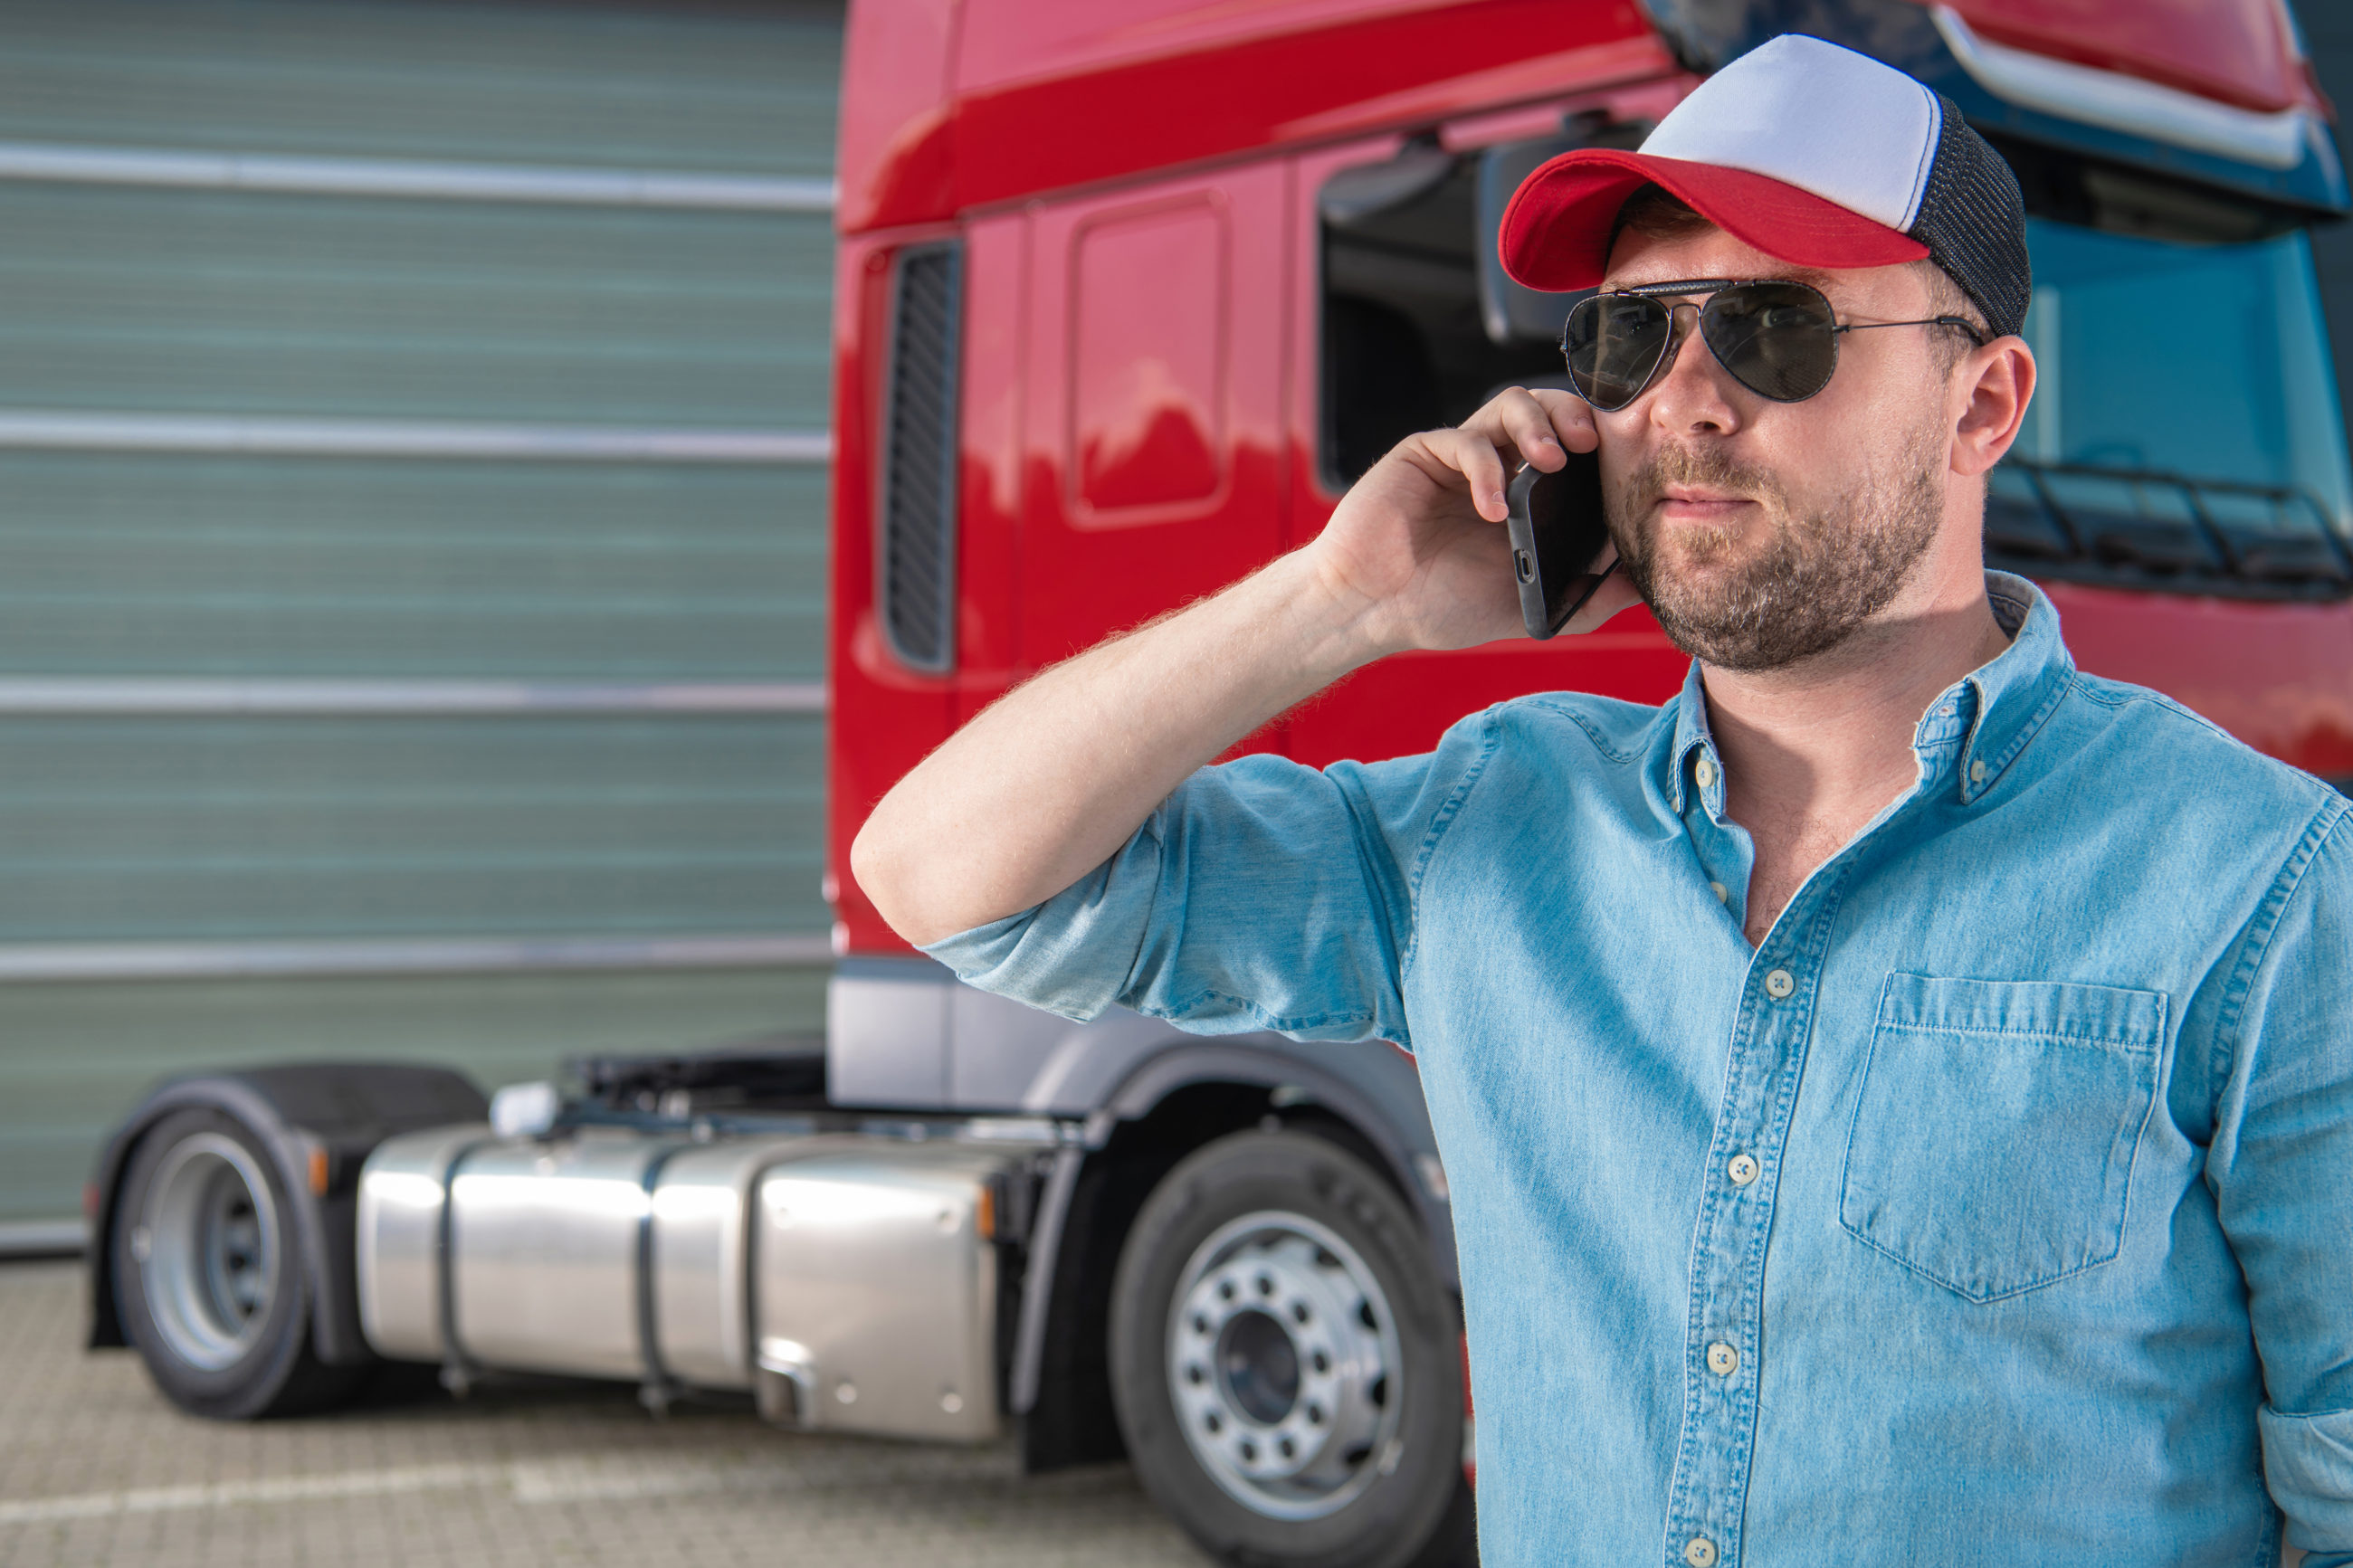 truck driver ordering new tractor parts by phone 2021 09 03 06 30 19 utc